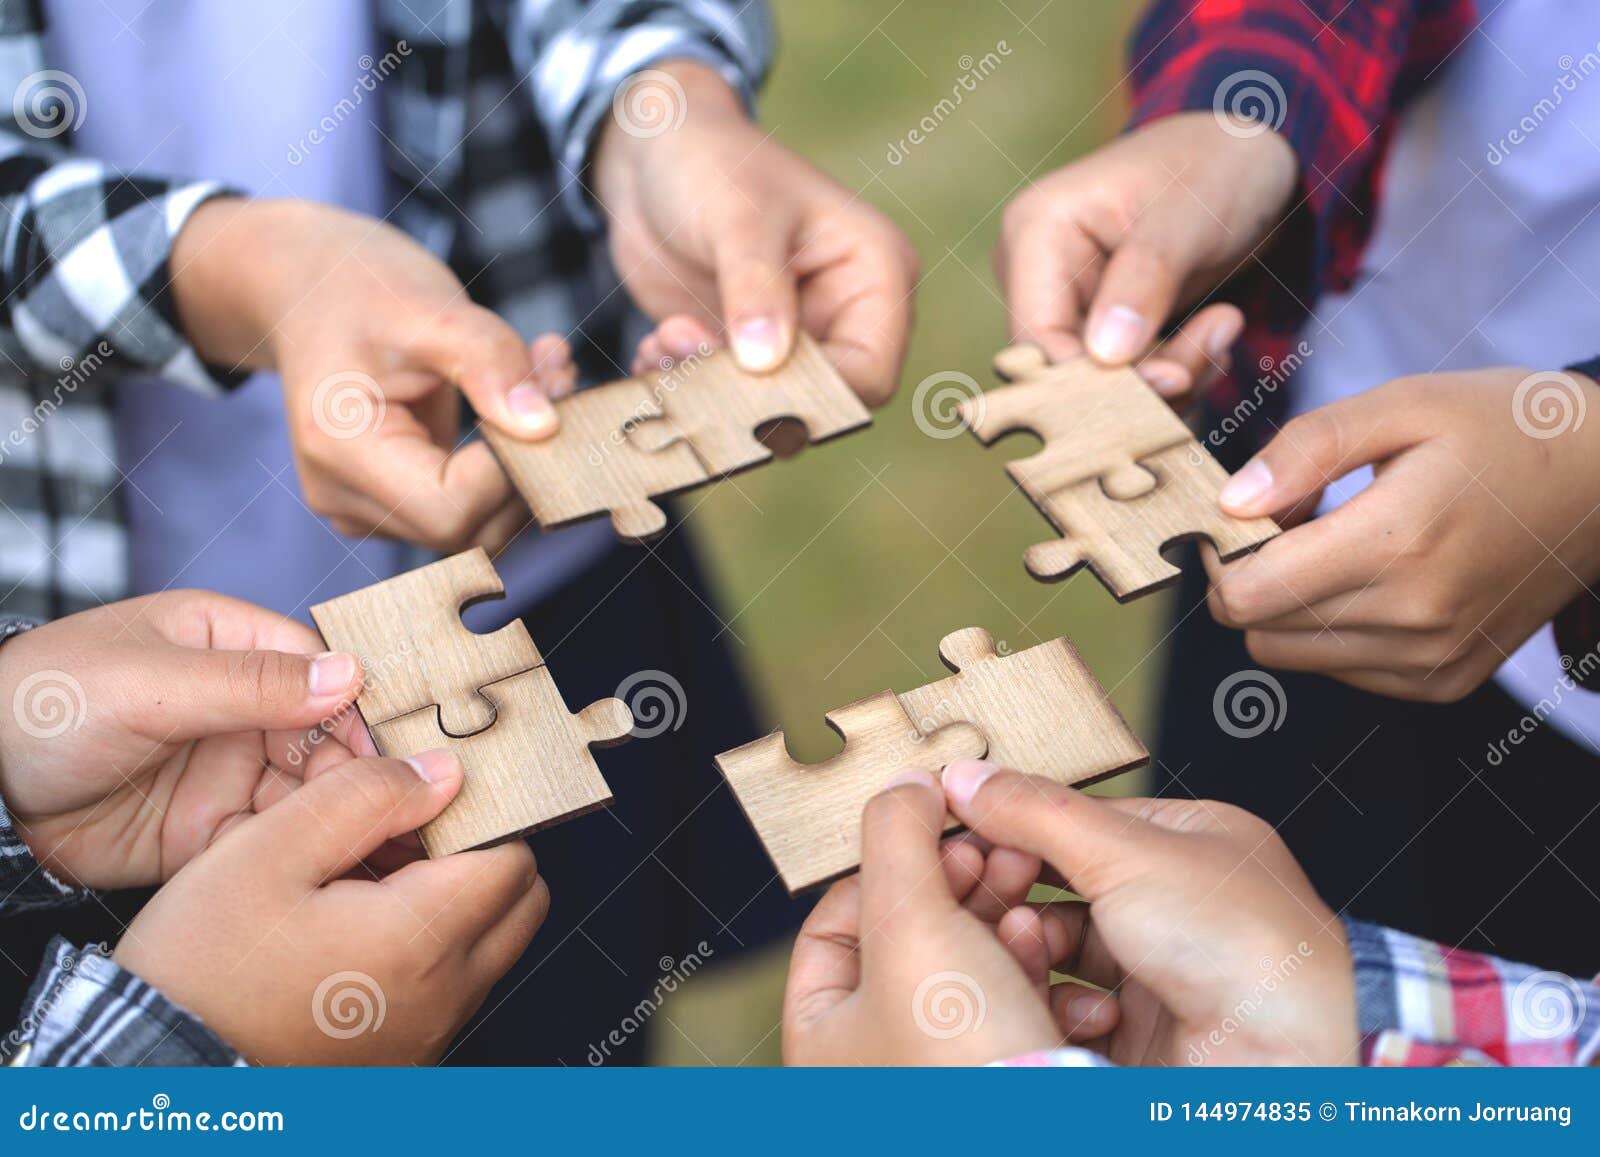 people helping in assembling puzzle, cooperation in decision making, team support in solving problems and corporate group teamwork